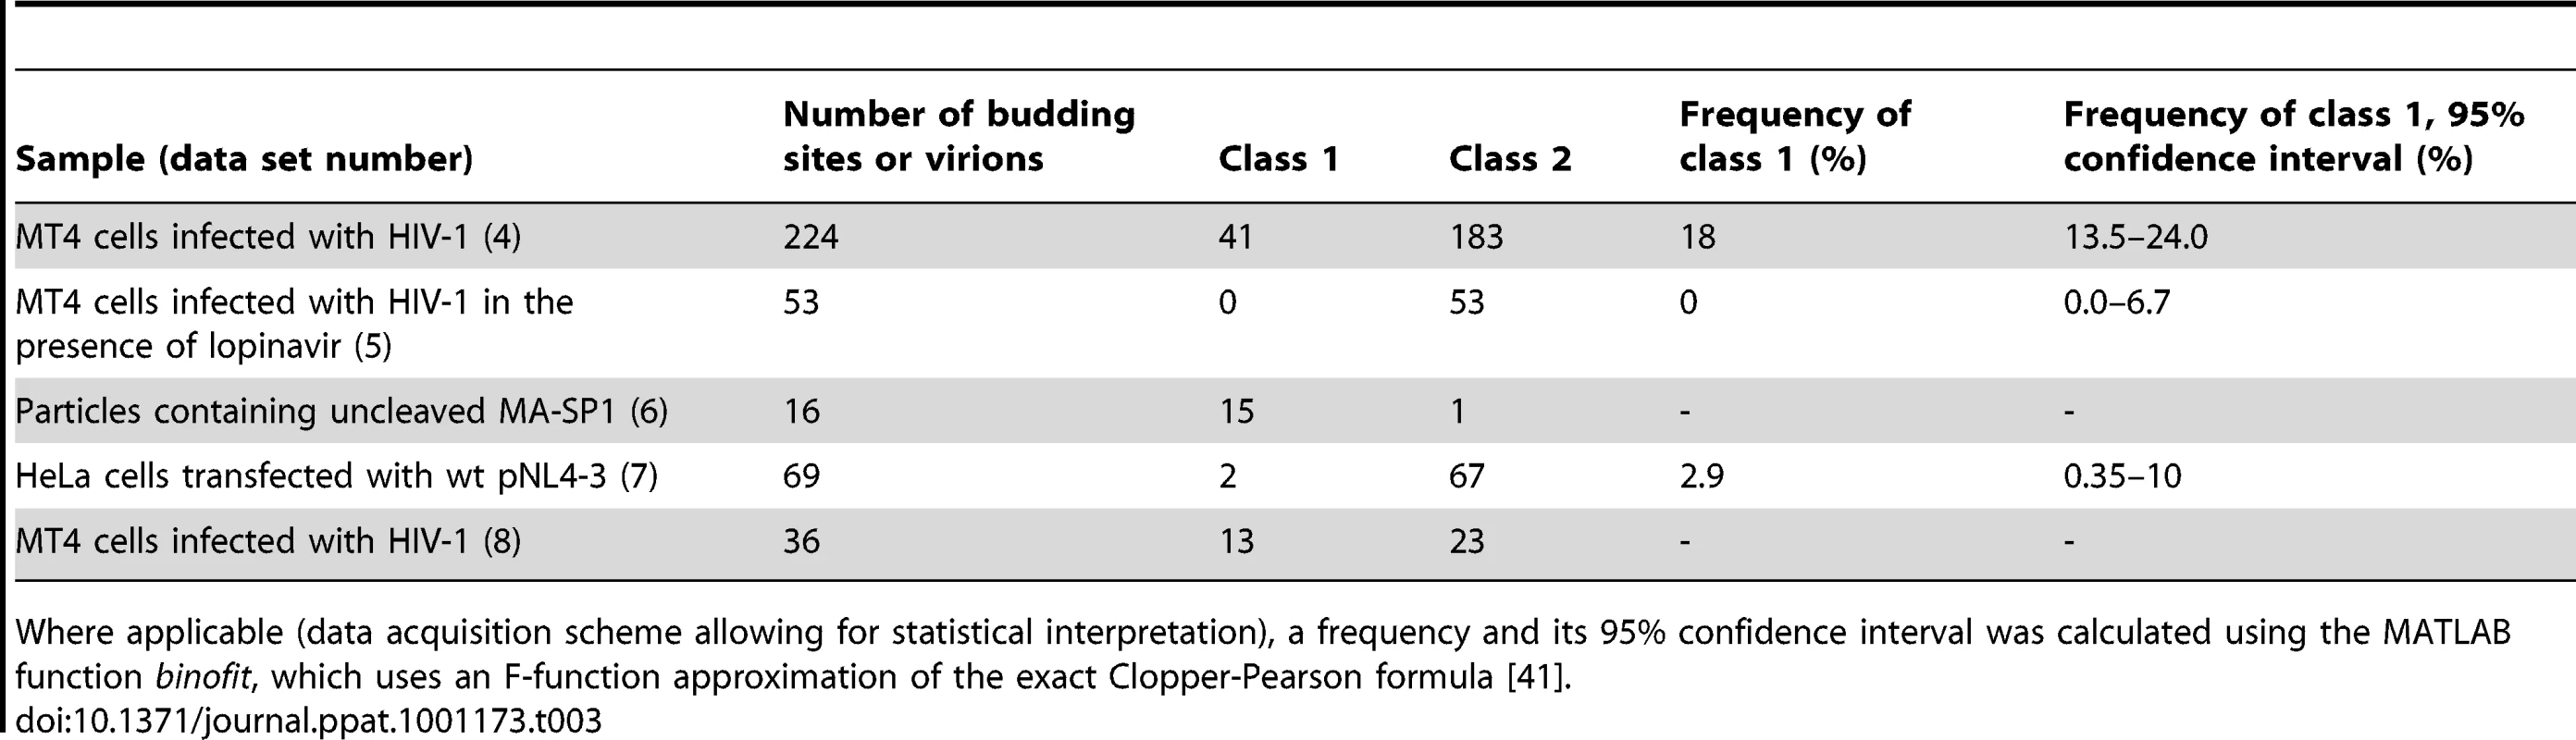 Number of budding sites or virions assigned to class 1 and class 2 Gag layer morphology, respectively, for the different sample groups.